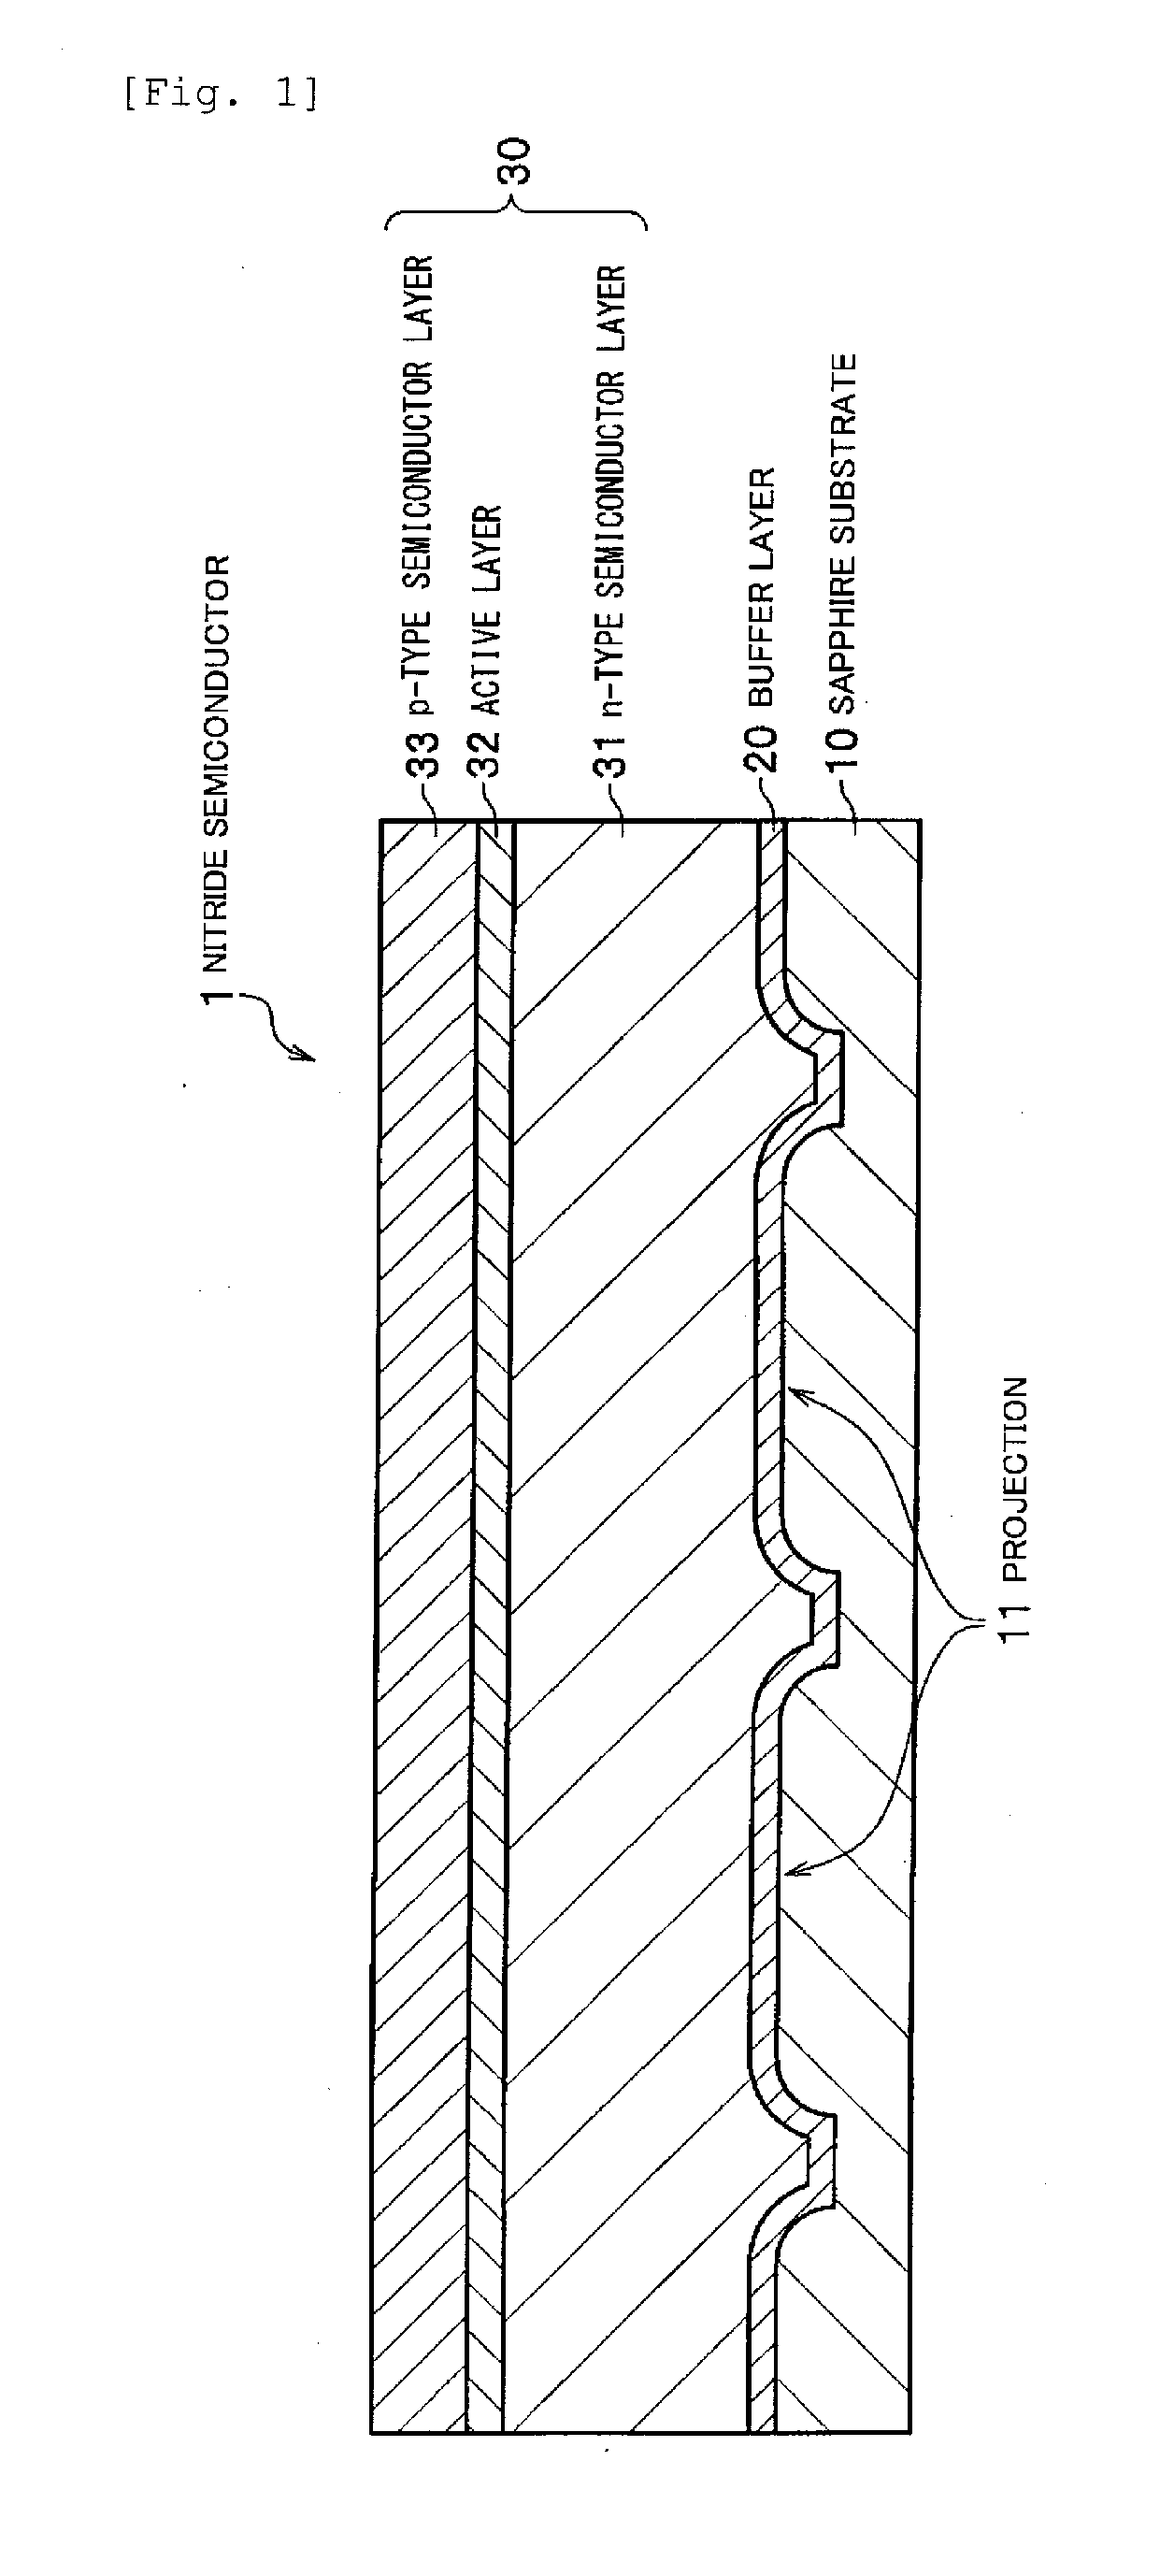 Nitride semiconductor element and method for manufacturing the same